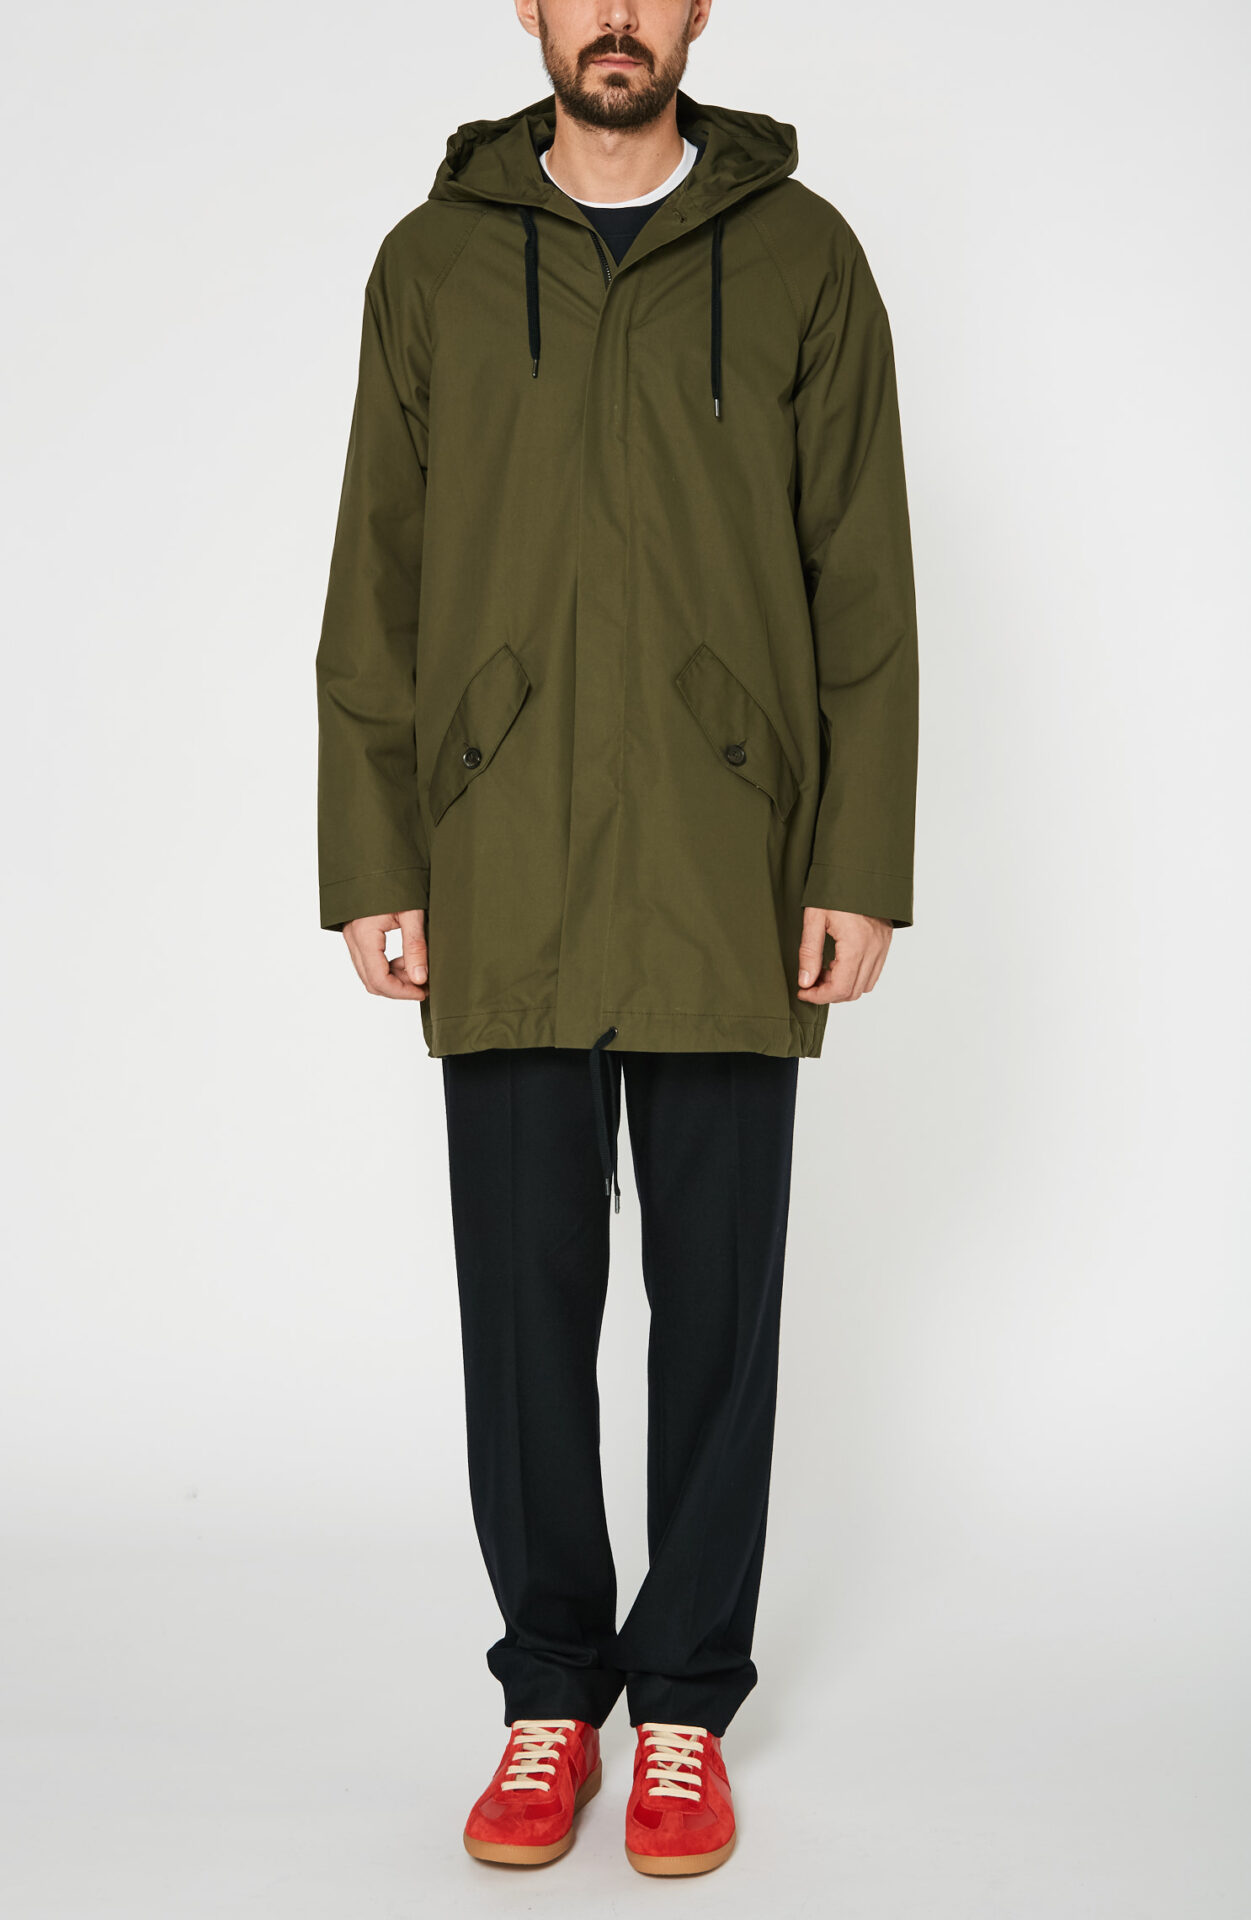 swallow pick look for A Kind Of Guise - Olive green "Permanent" parka - Schwittenberg